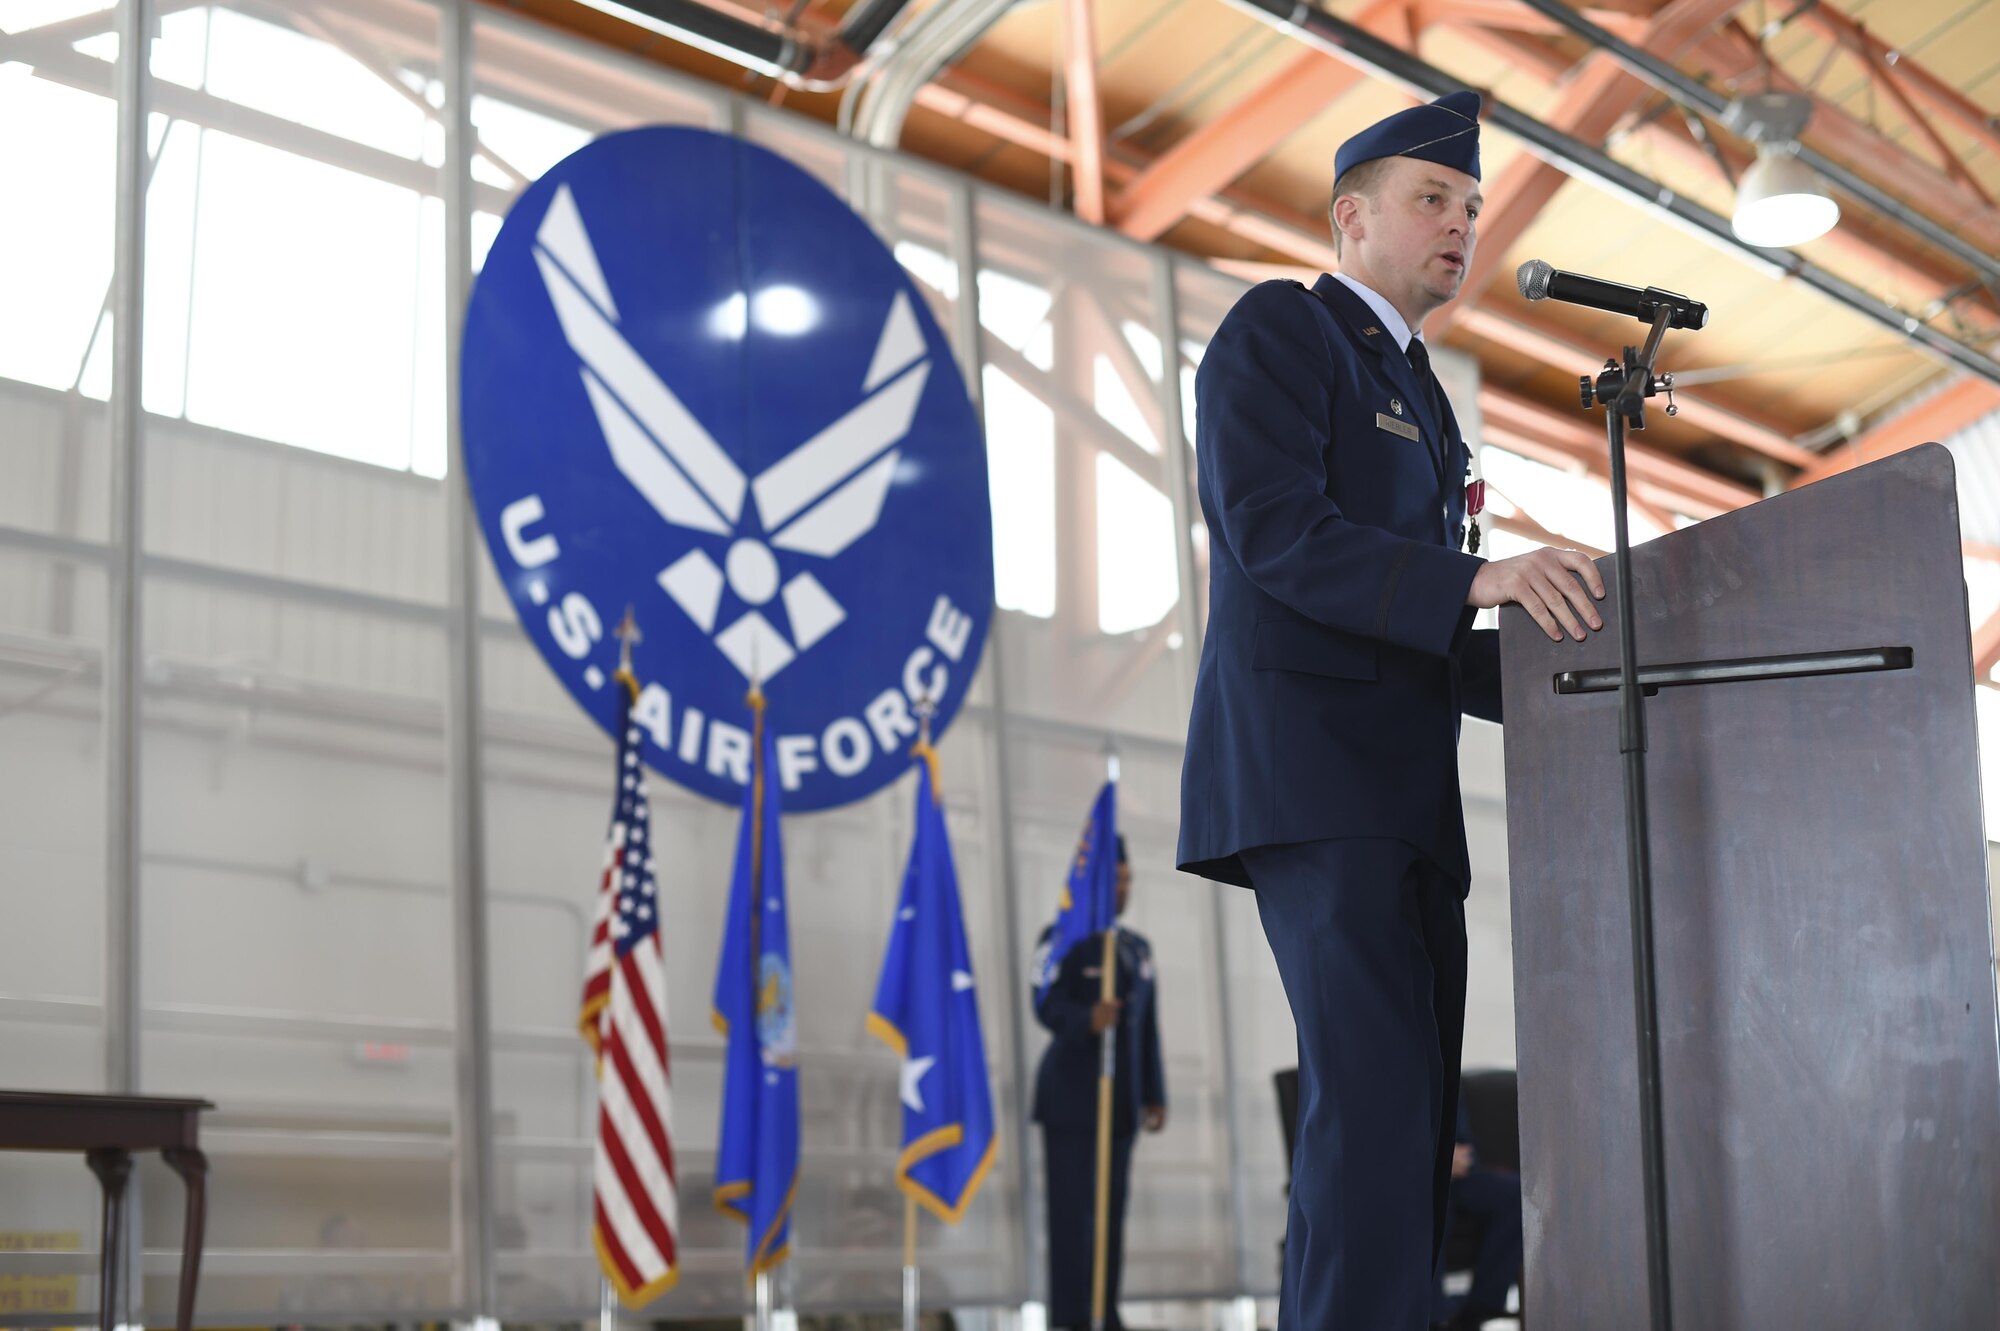 Col. Robert Kiebler delivers his final speech during a change-of-command ceremony July 15 at Hangar 500 at Holloman Air Force Base N.M. Col. Houston Cantwell assumed command of the 49th Wing and Holloman Air Force Base from the previous commander, Col. Robert Kiebler. As commander of the 49th Wing, Cantwell will lead Holloman’s mission to provide combat-ready Airmen, train MQ-1 Predator and MQ-9 Reaper pilots and sensor operators, and hosts the 54th Fighter Group's F-16 Fighting Falcon pilot training mission, the 96th Test Group's high-speed test track mission and the German Air Force Flying Training Center. (U.S. Air Force Photo by: Staff Sgt. Stacy Moless)